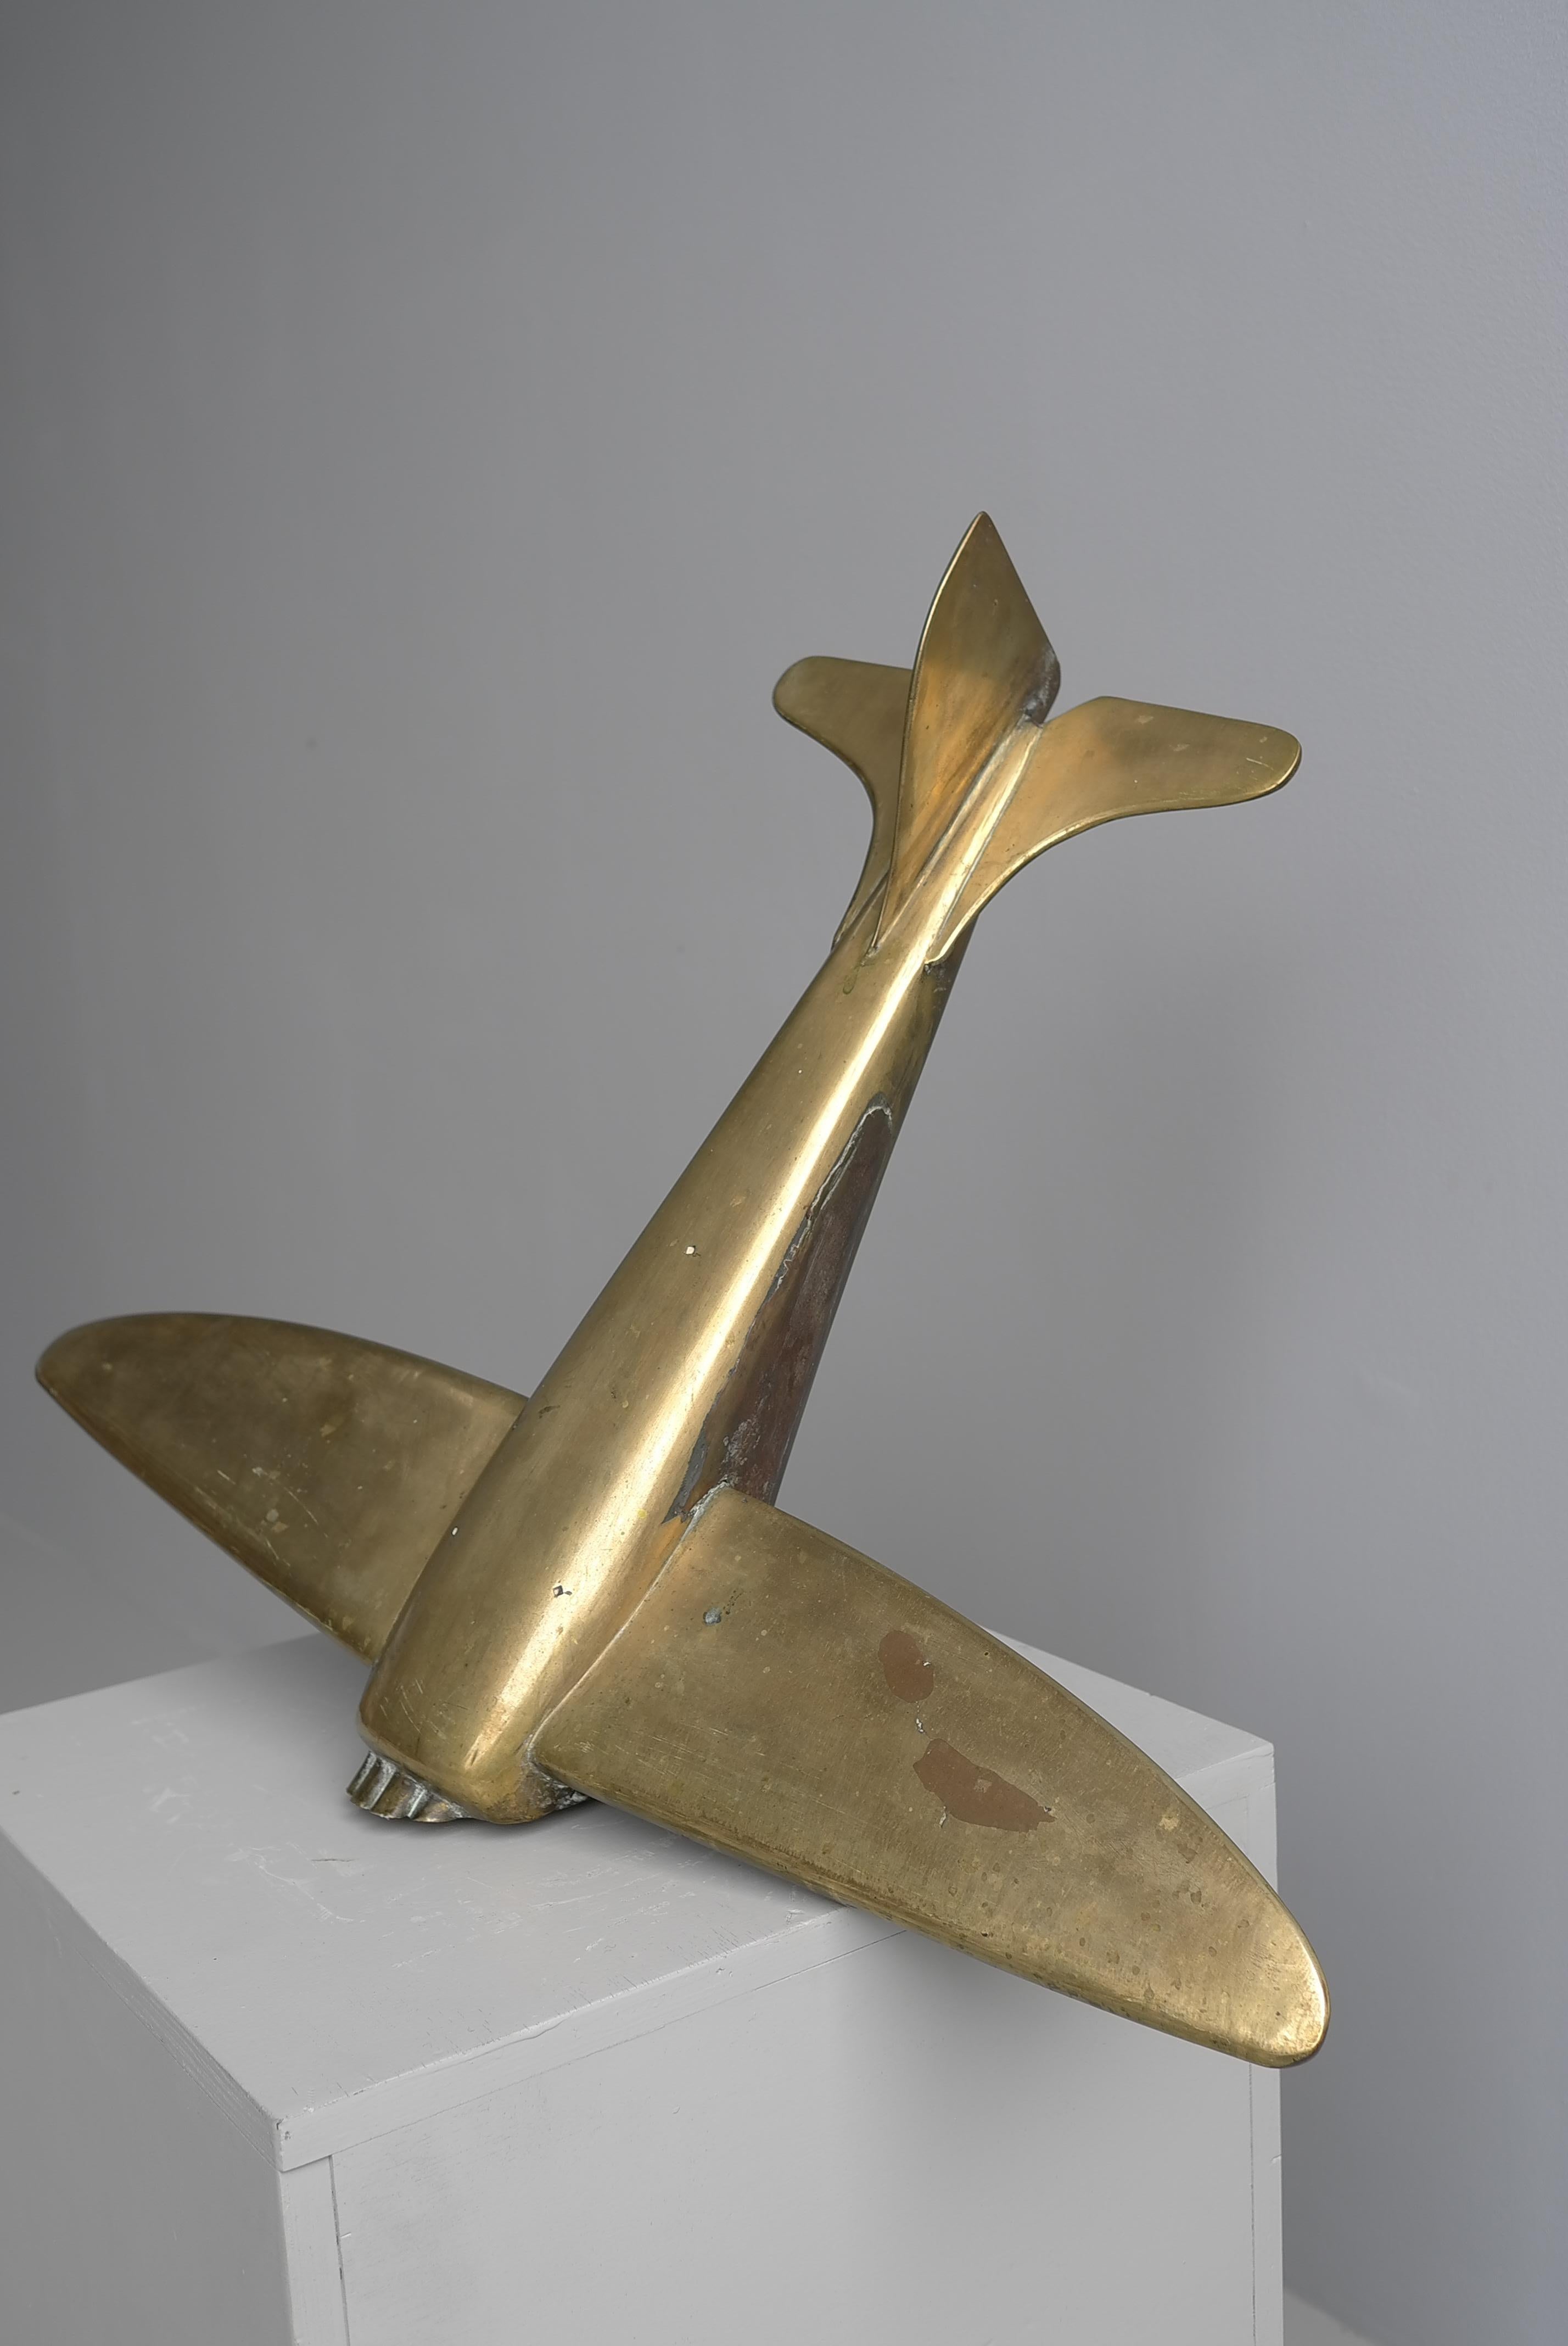 Large Bronze and Brass Airplane 'Crashed' Mancave Art Deco Mid Century Modern.

This is an eye-Catcher and suits any Mid-Century or modern home. Can be placed on the ground, sideboard etc. In good vintage condition with a lovely Patina.